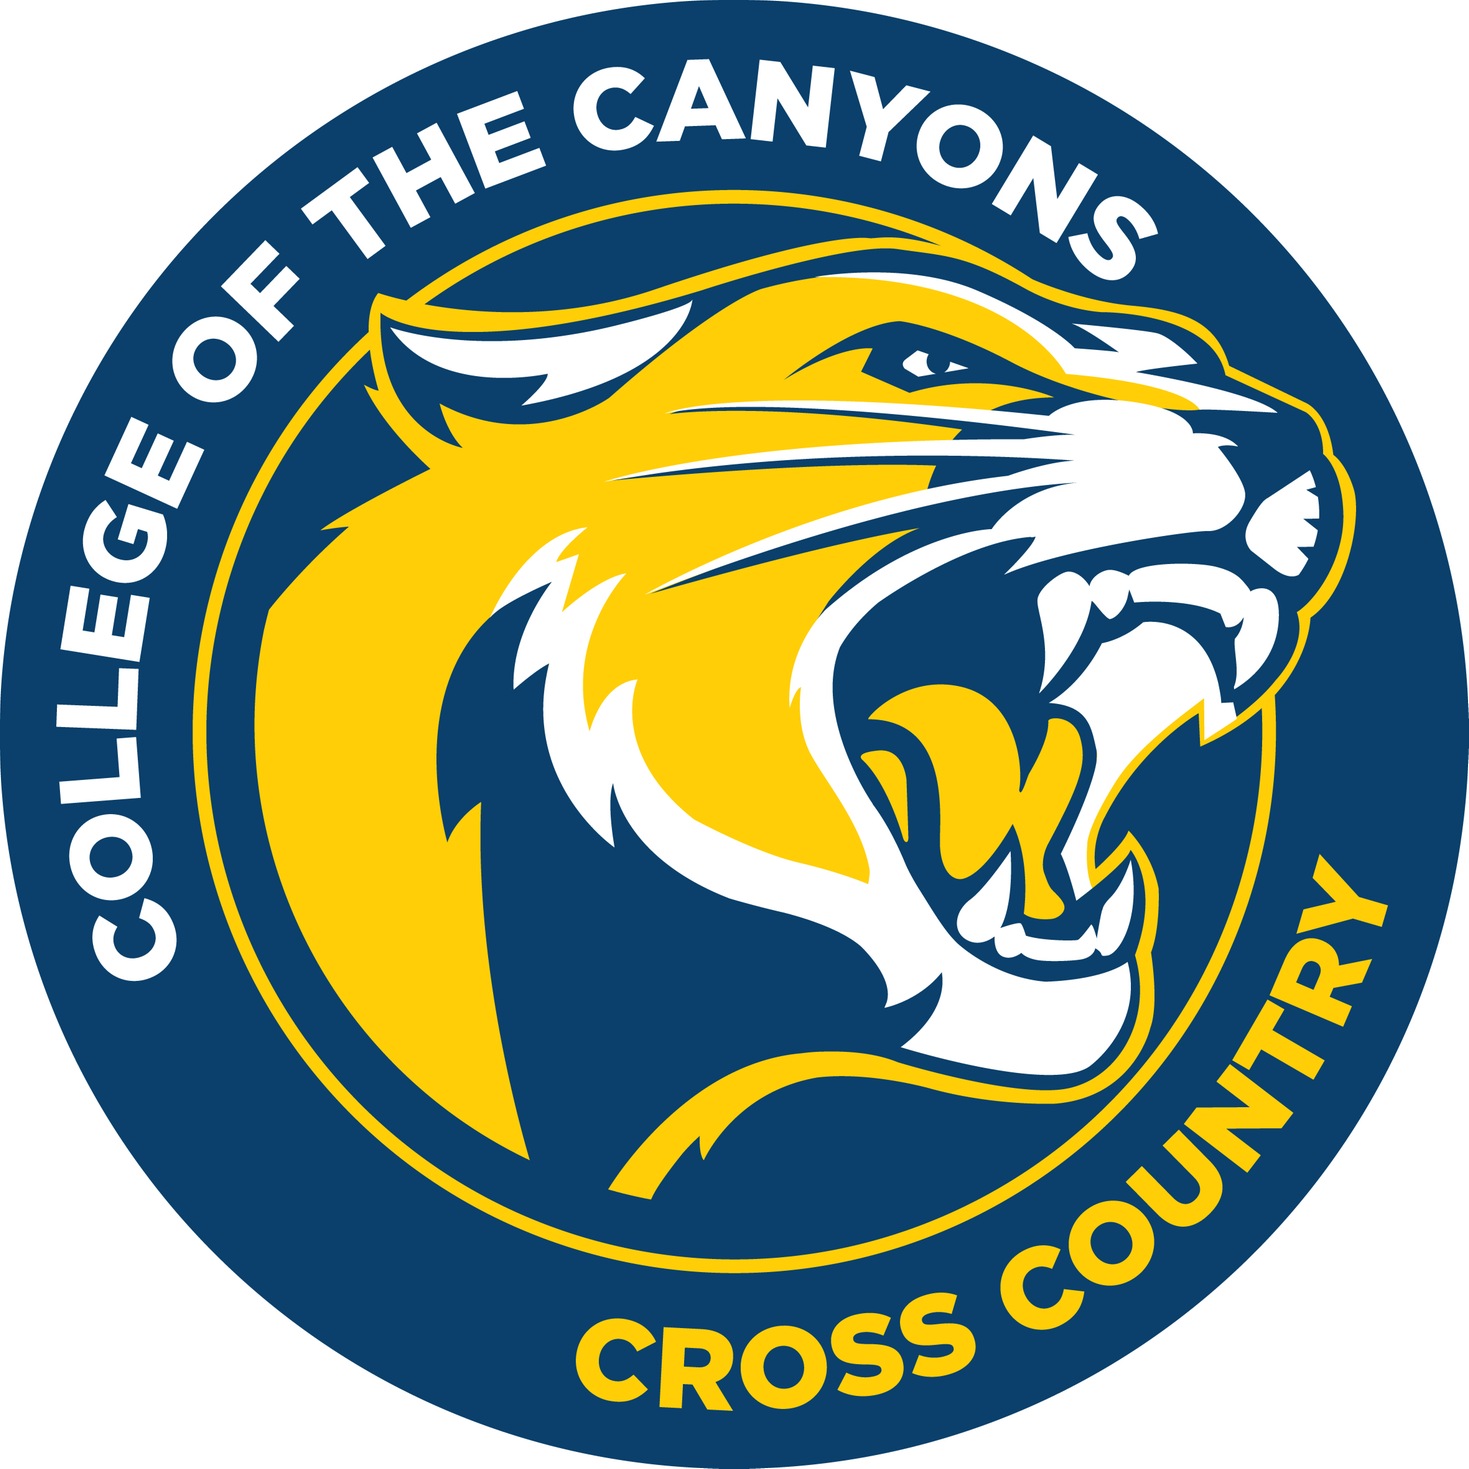 College of the Canyons cross country logo.